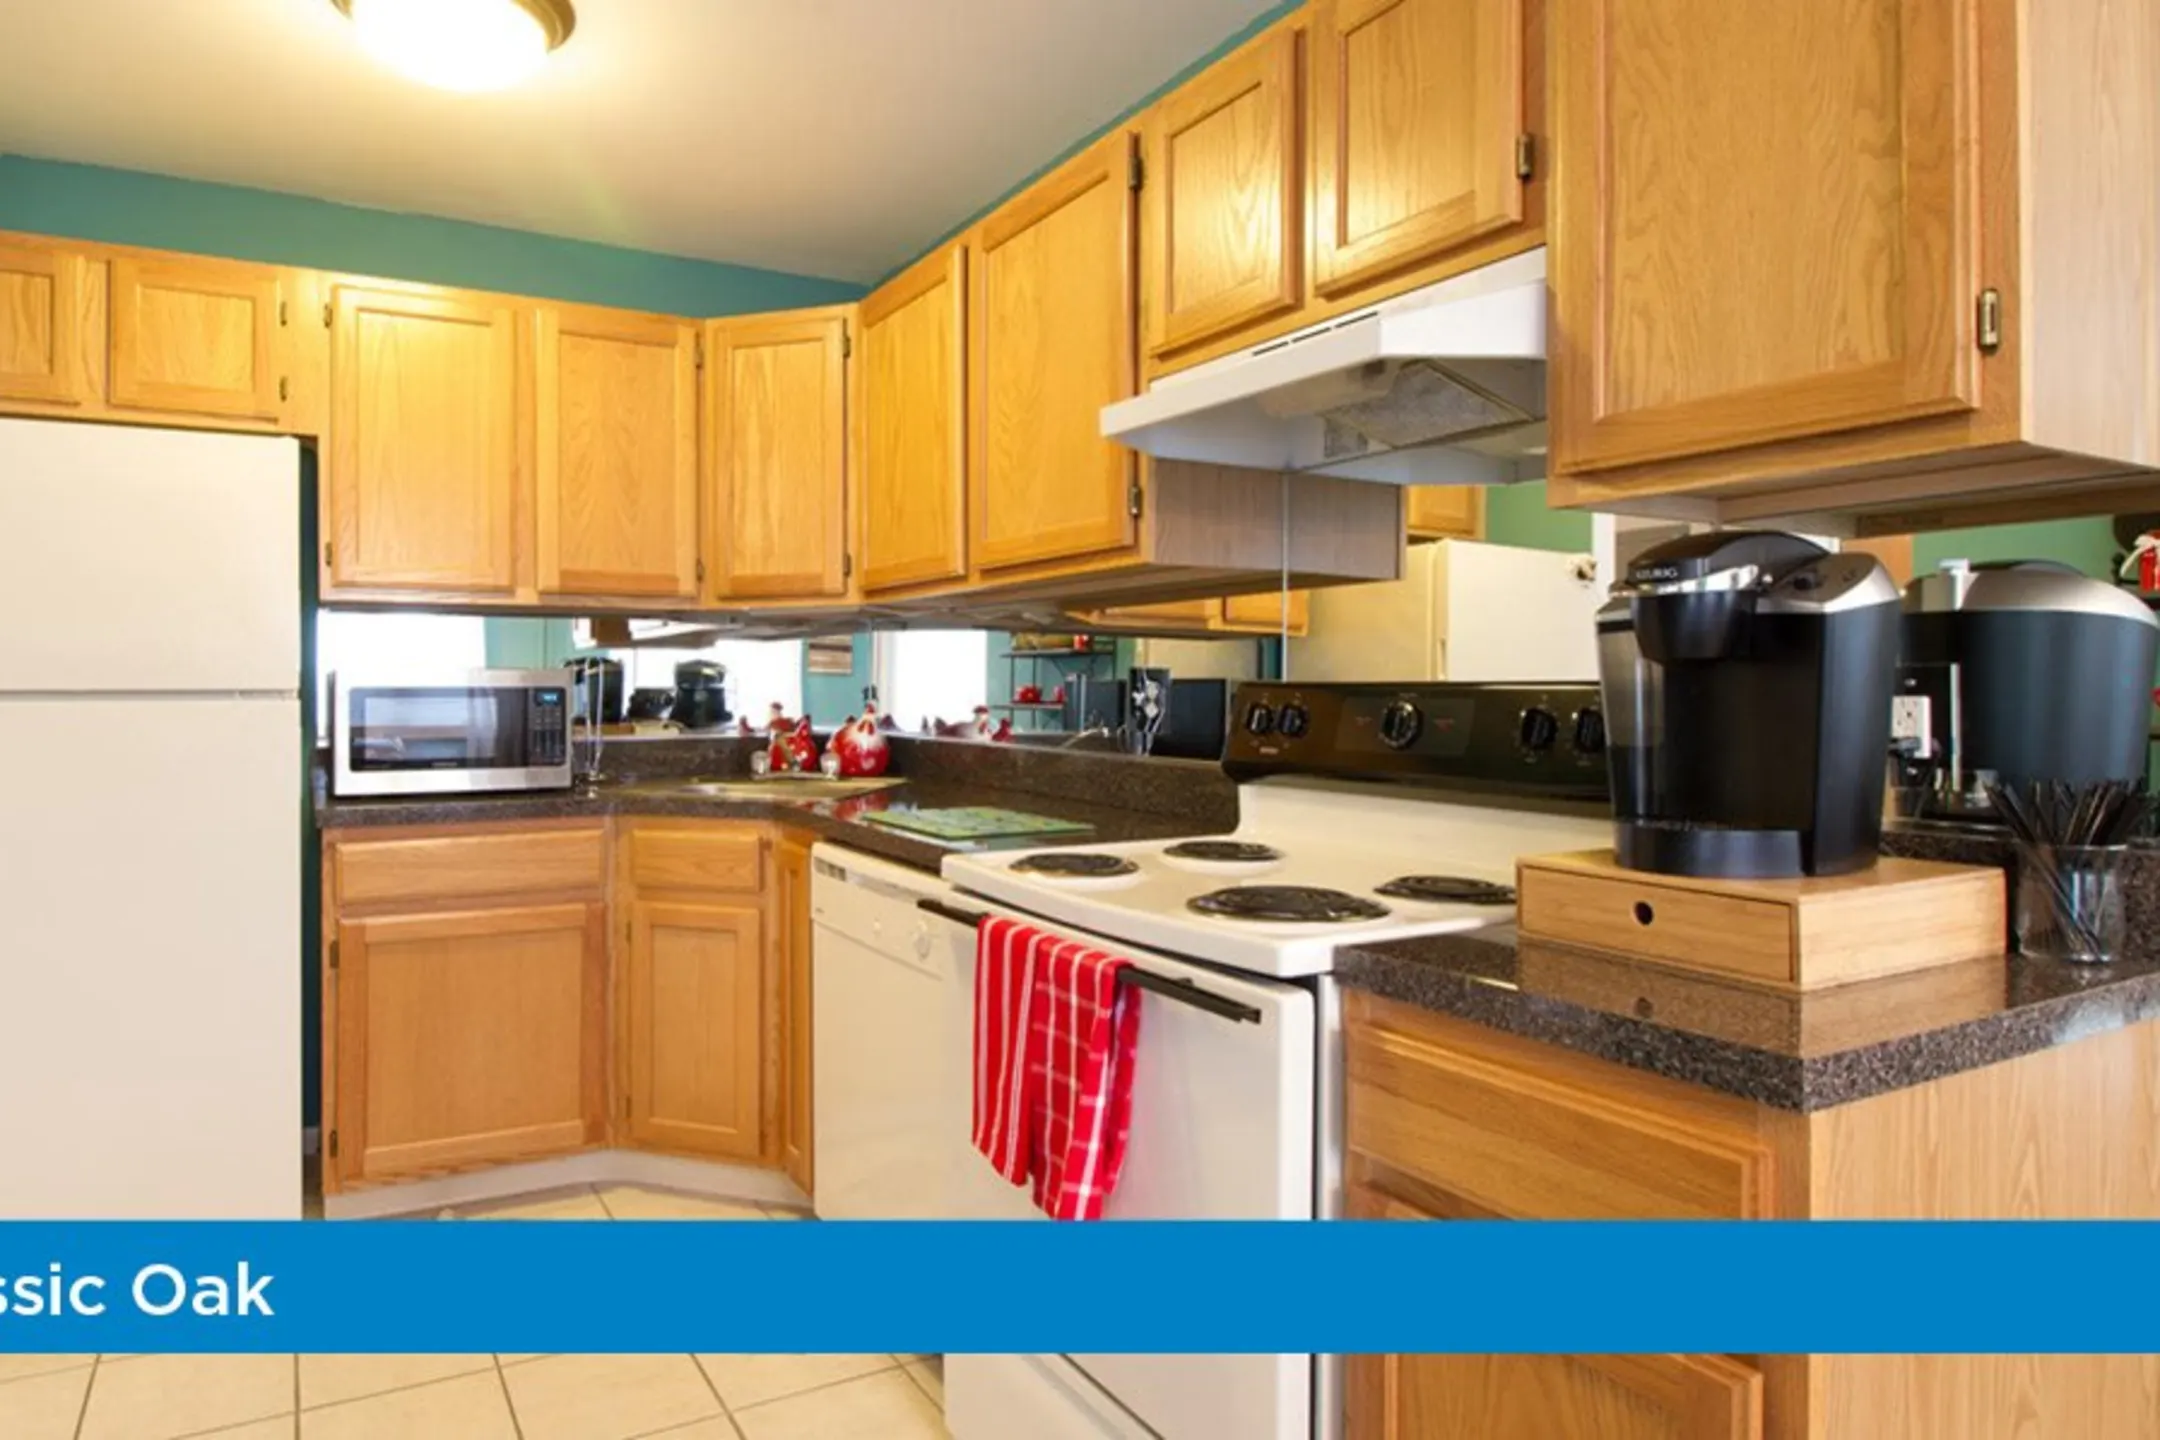 Kitchen - Imperial Gardens Apartment Homes - Middletown, NY